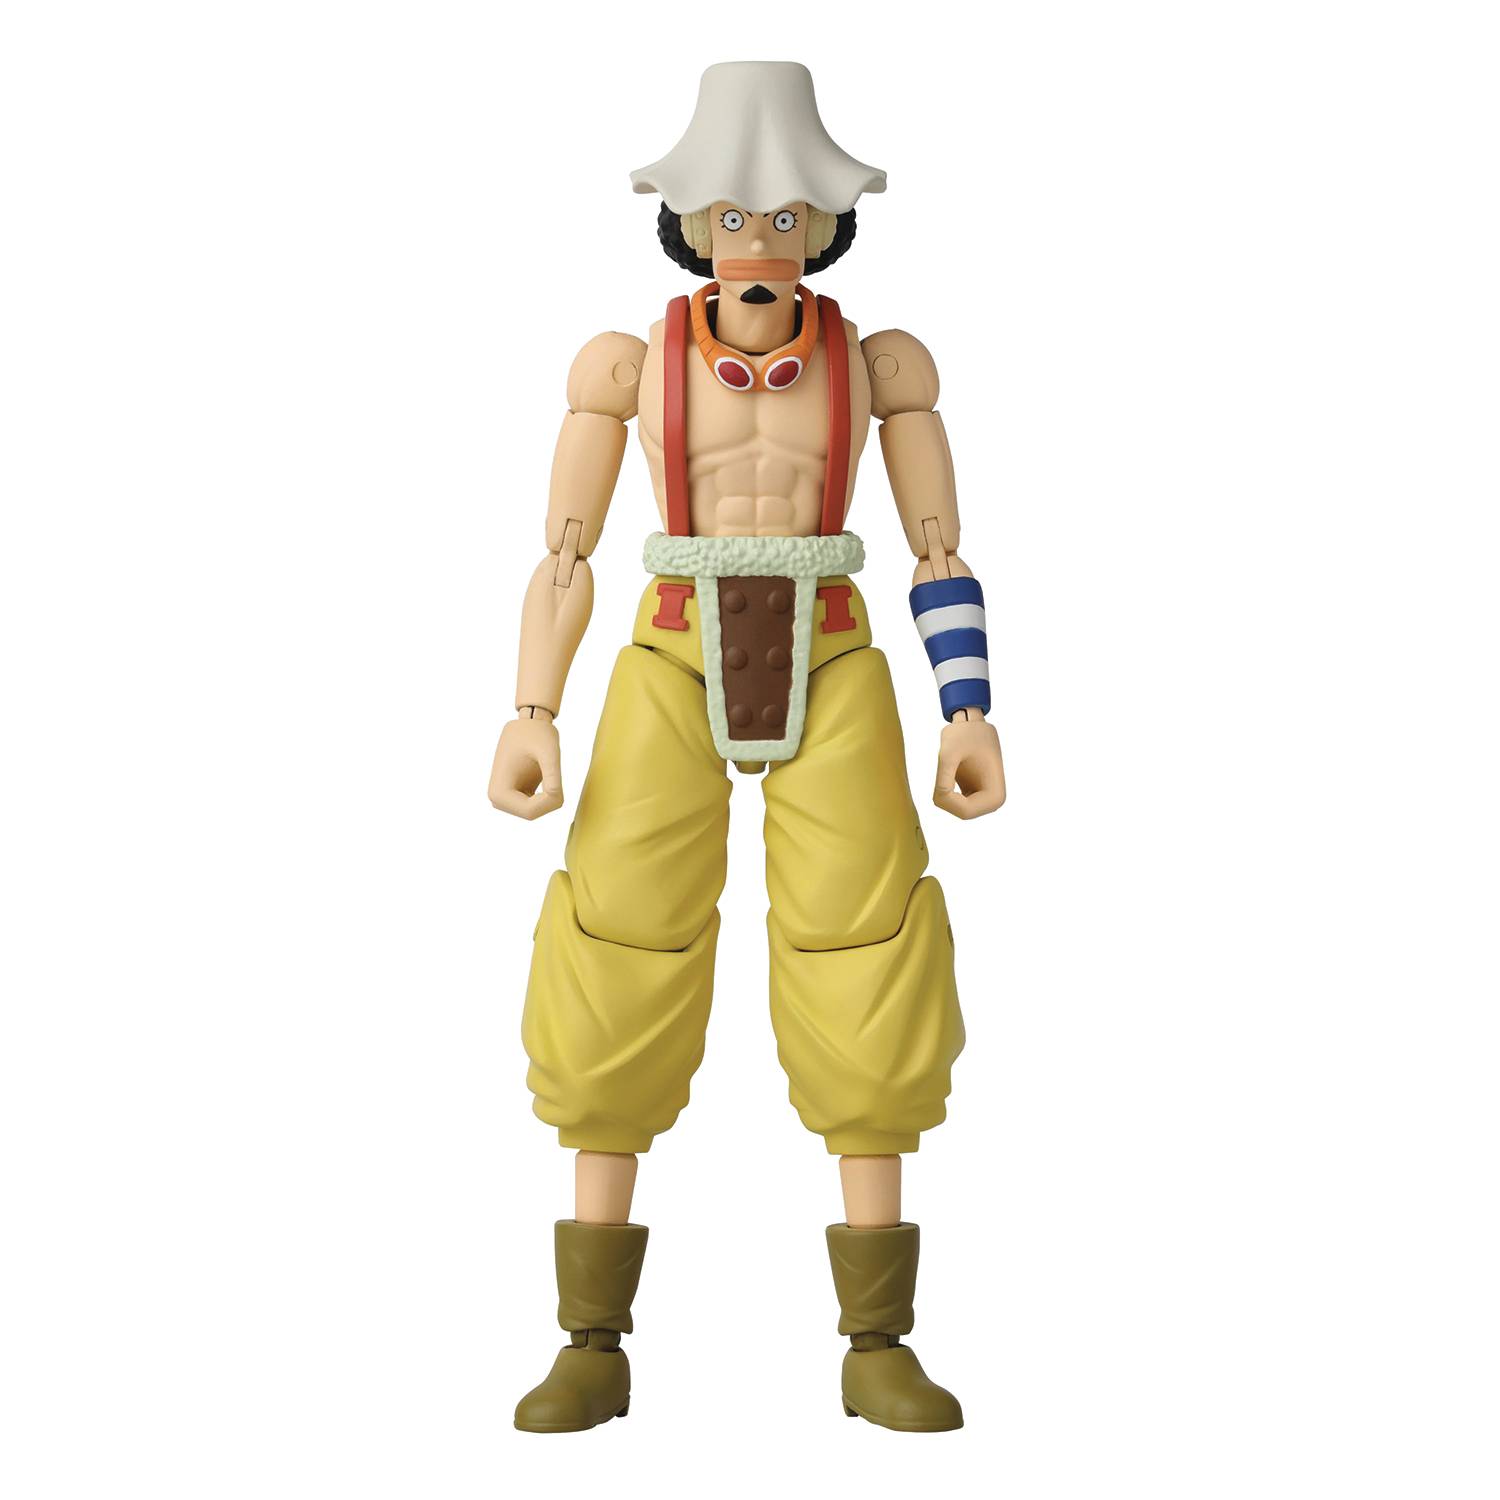  Anime Heroes One Piece Sanji Action Figure : Toys & Games